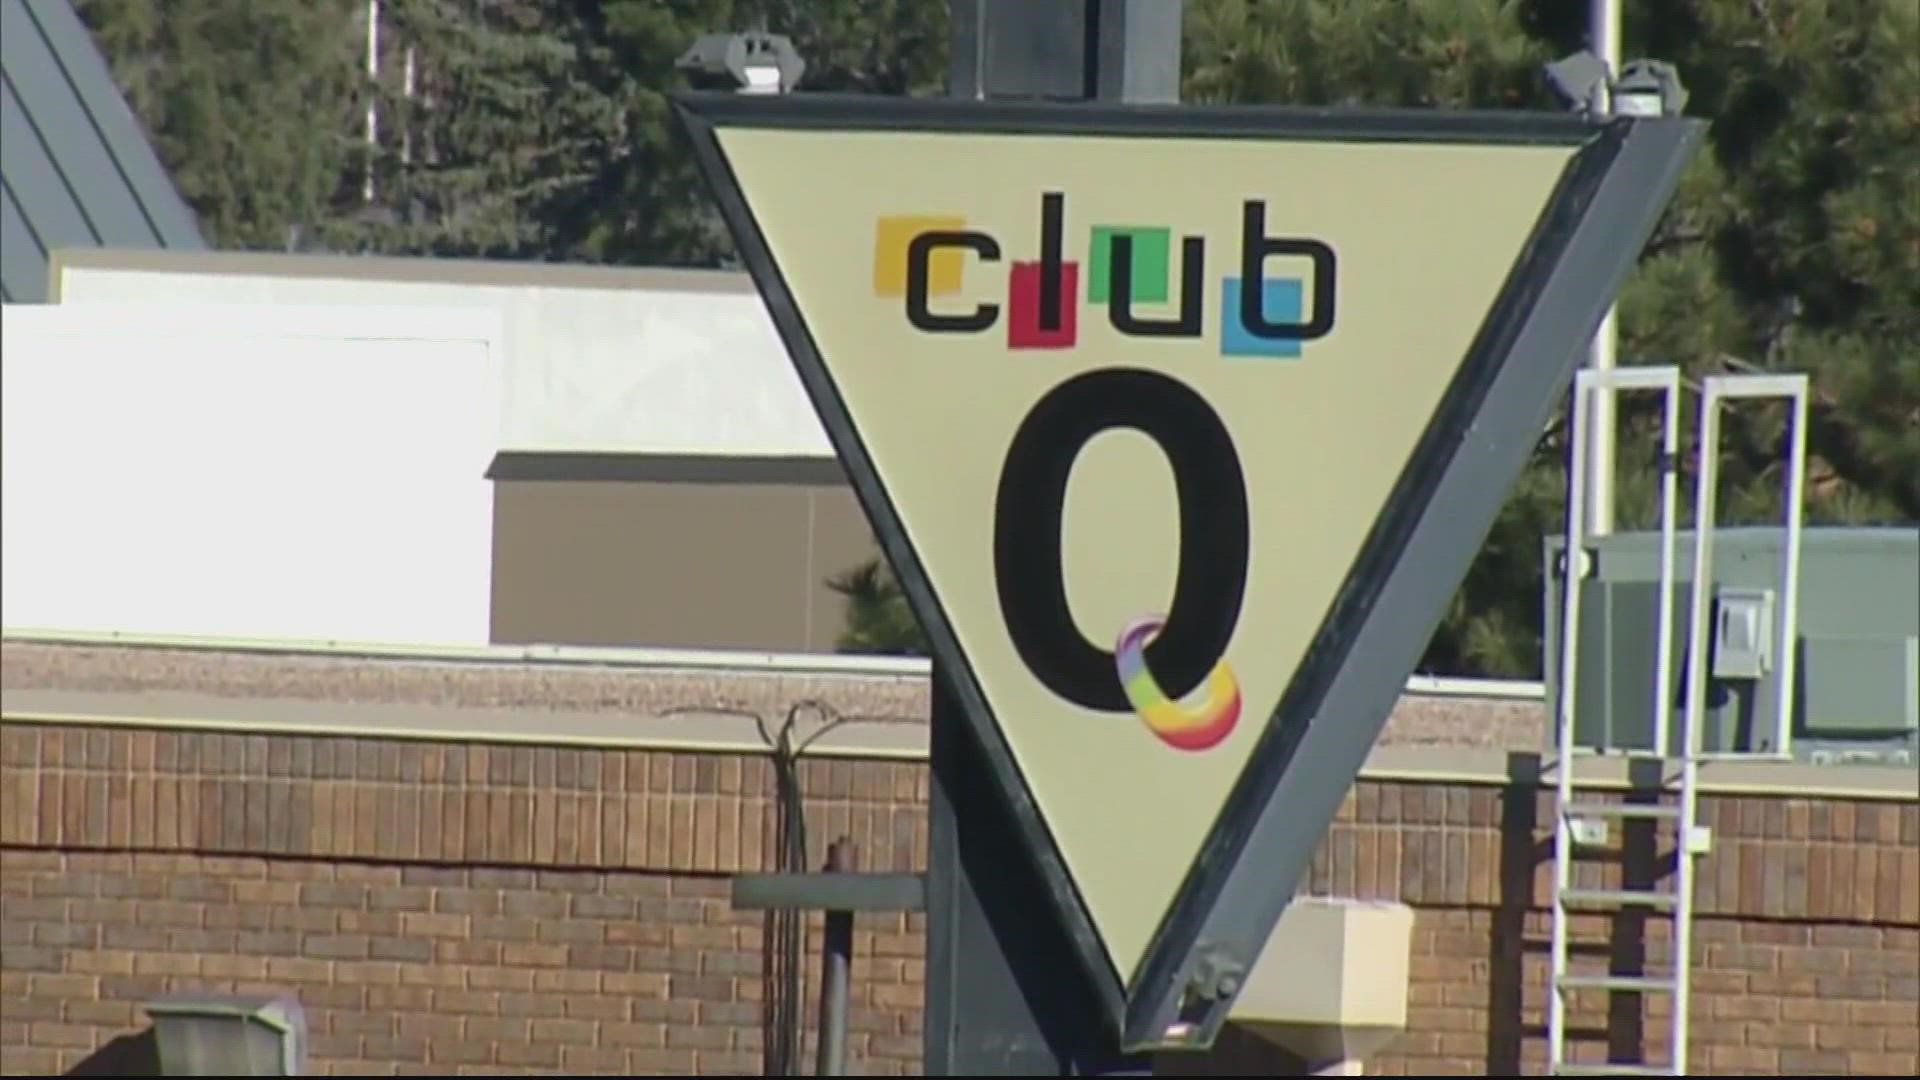 The deadly shooting at the LGBTQ club has shaken Colorado Springs to its core.